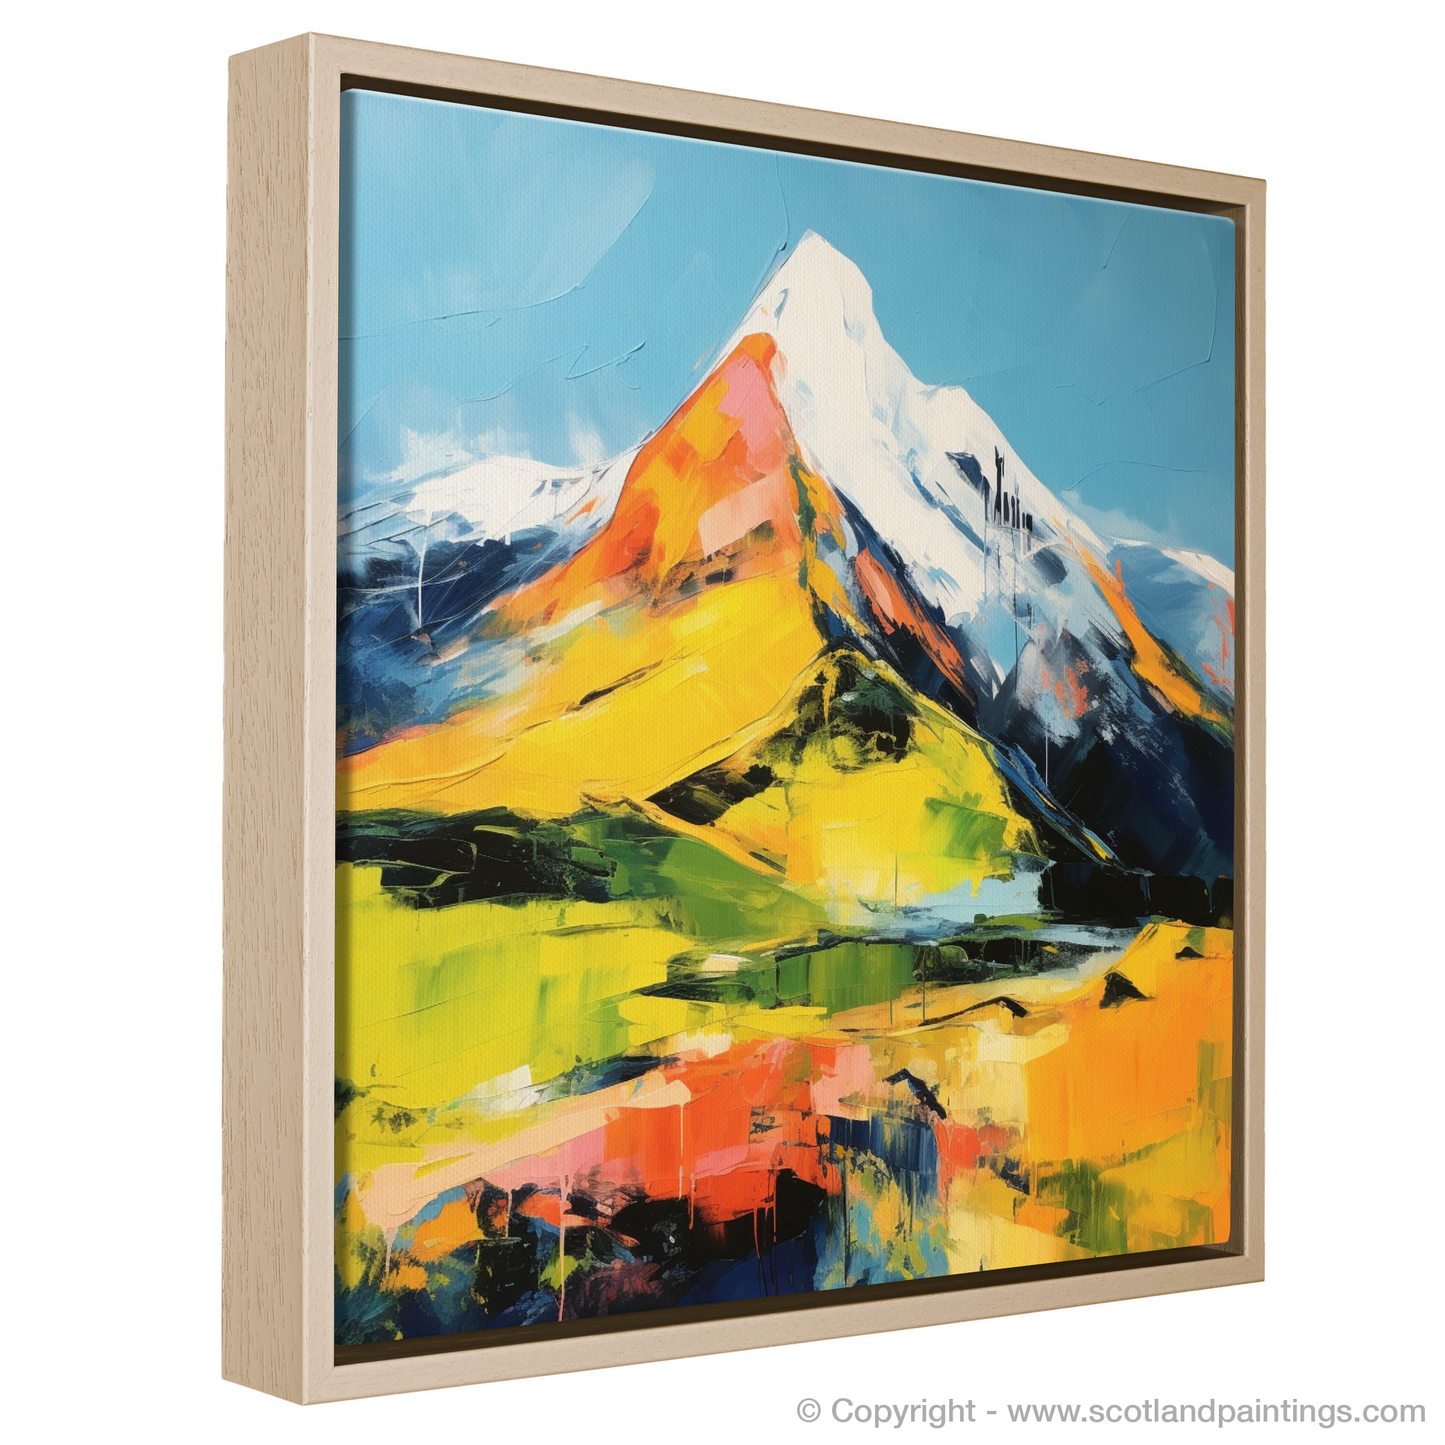 Painting and Art Print of Stob Dearg (Buachaille Etive Mòr) entitled "Abstract Impressions of Stob Dearg".